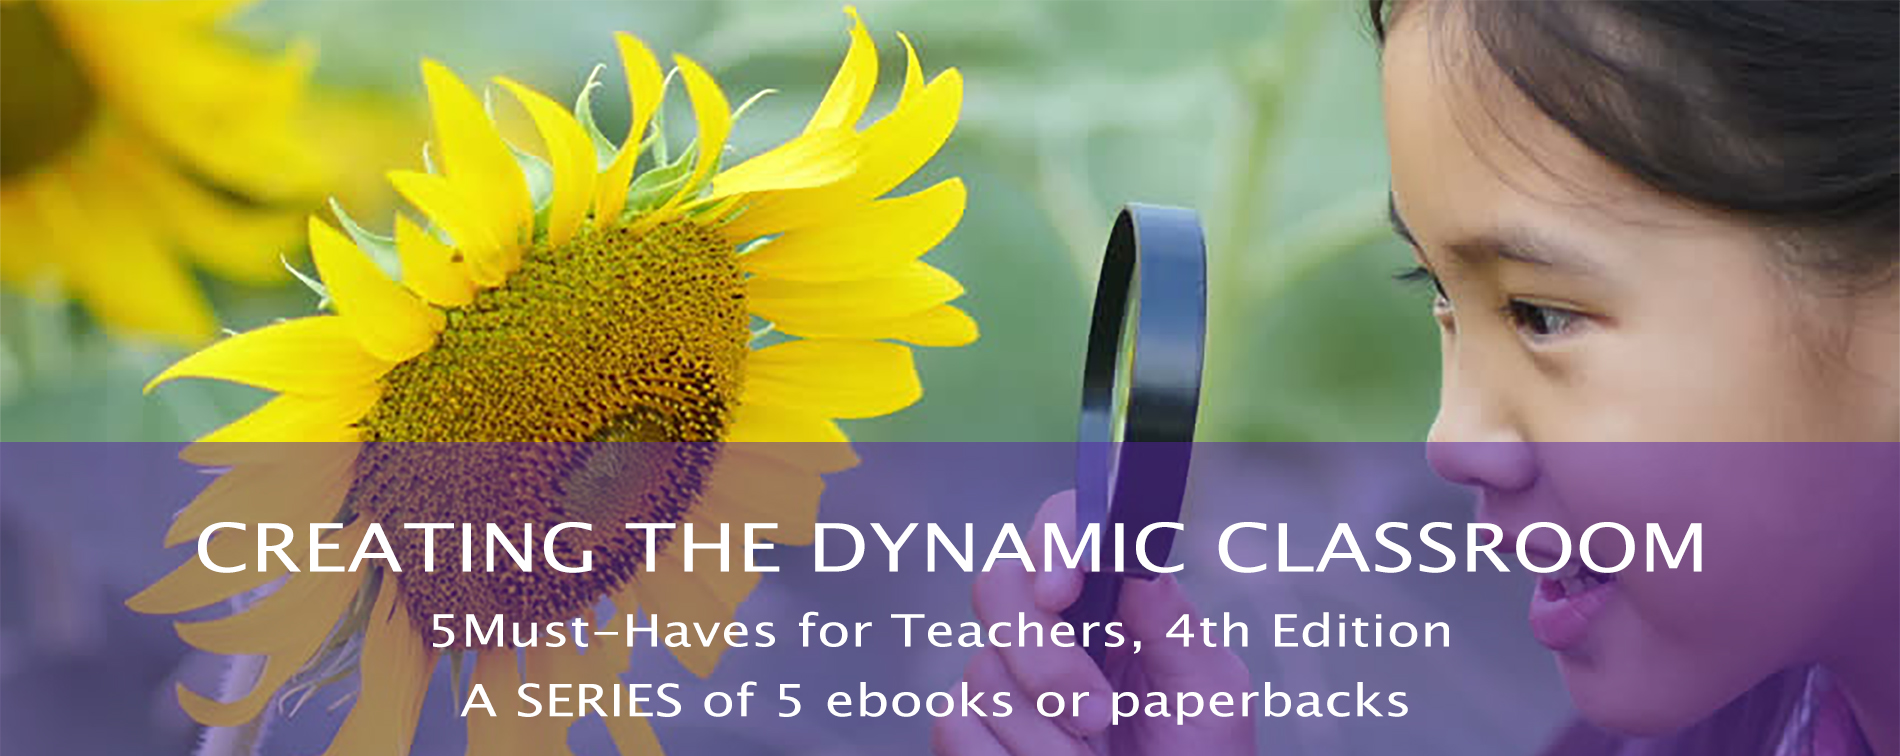 Creating the Dynamic Classroom - 5 Must-Haves for Teachers - 4th Edition 2020 - A SERIES of 5 ebooks or paperbacks